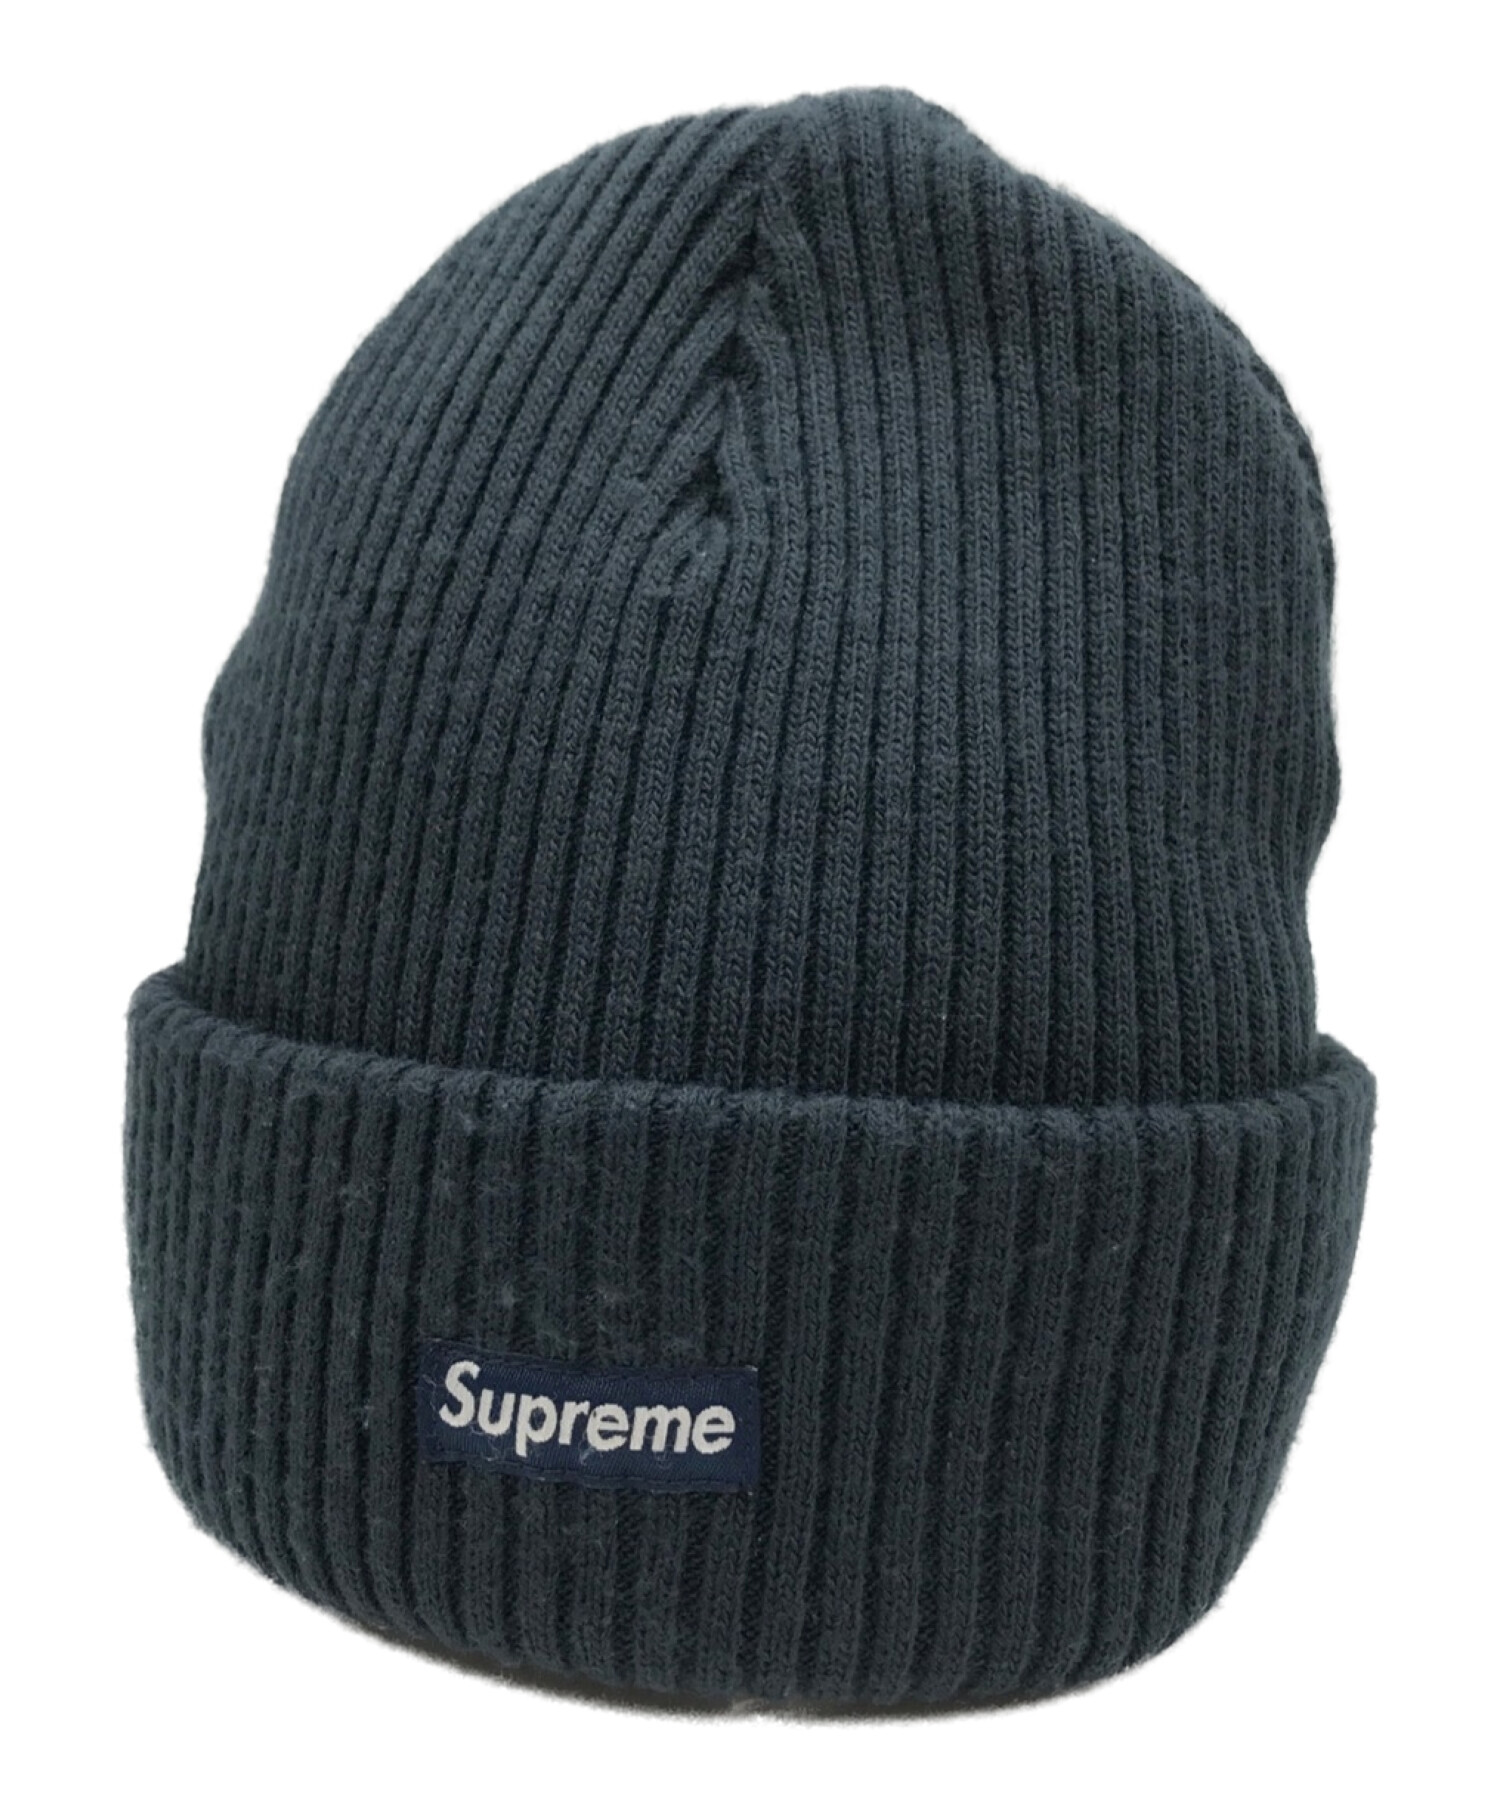 supreme overdyed ribbed beanie 18ss黒 新品